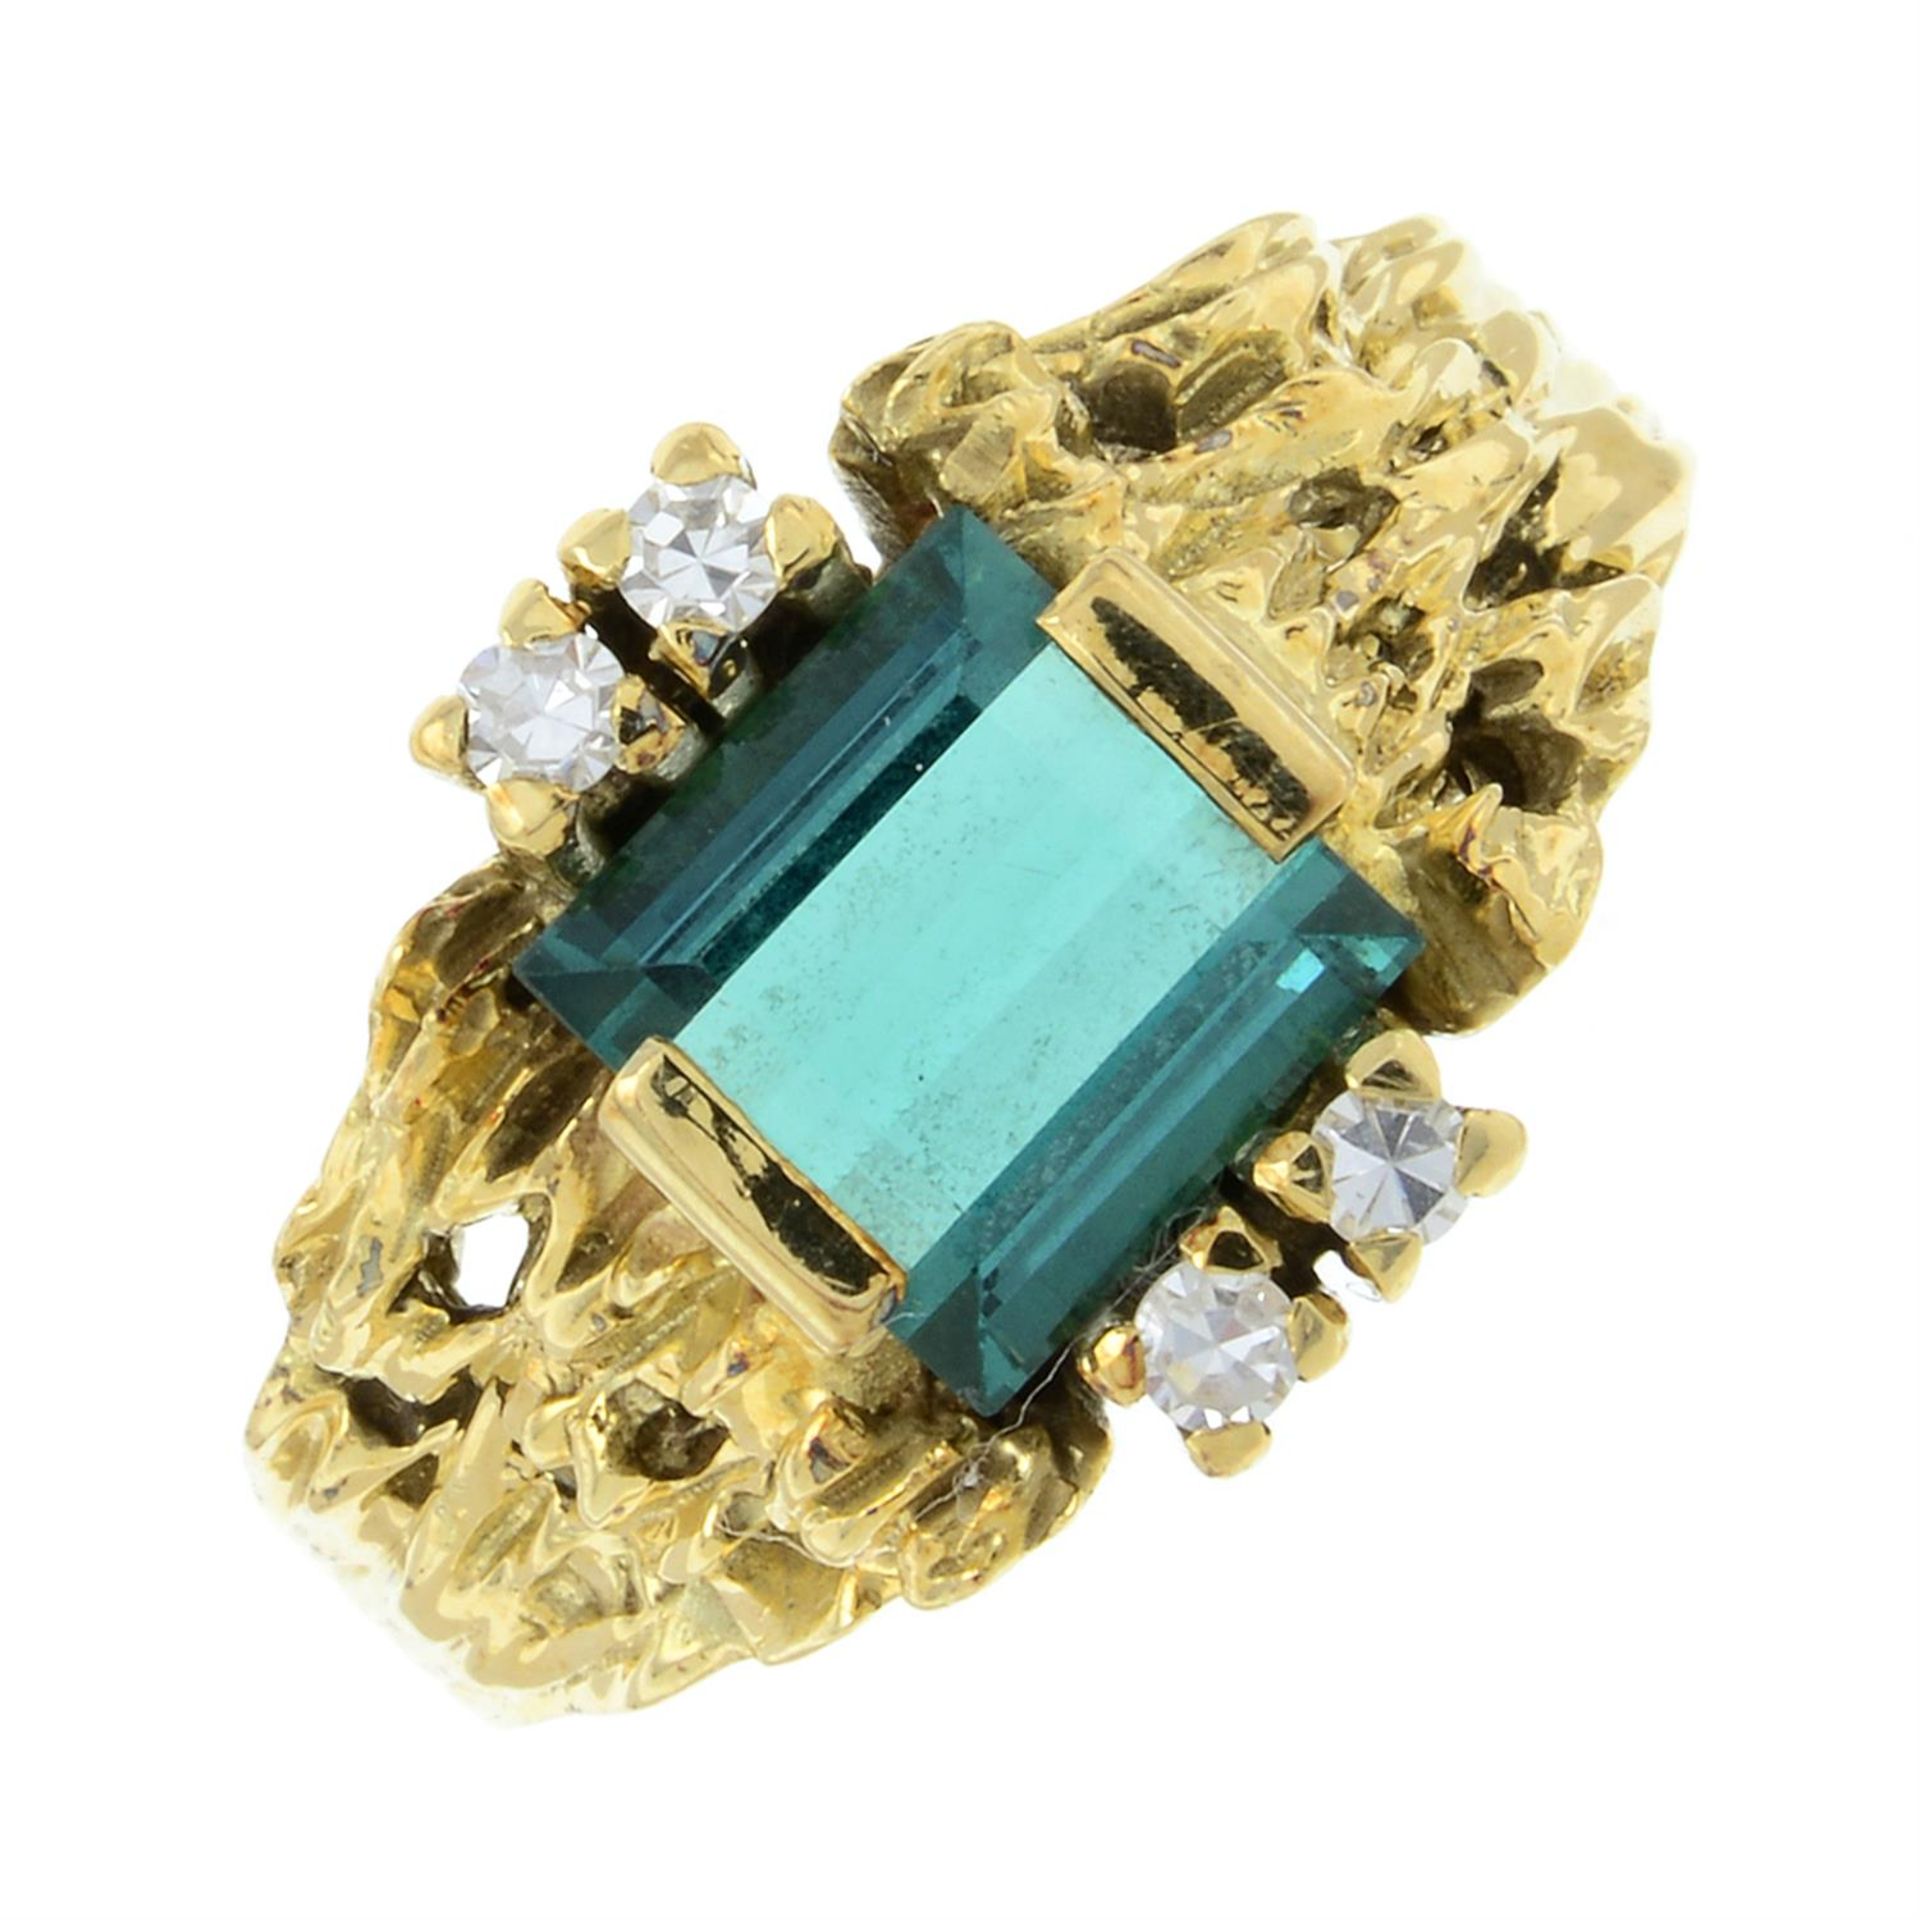 A tourmaline and diamond textured ring.